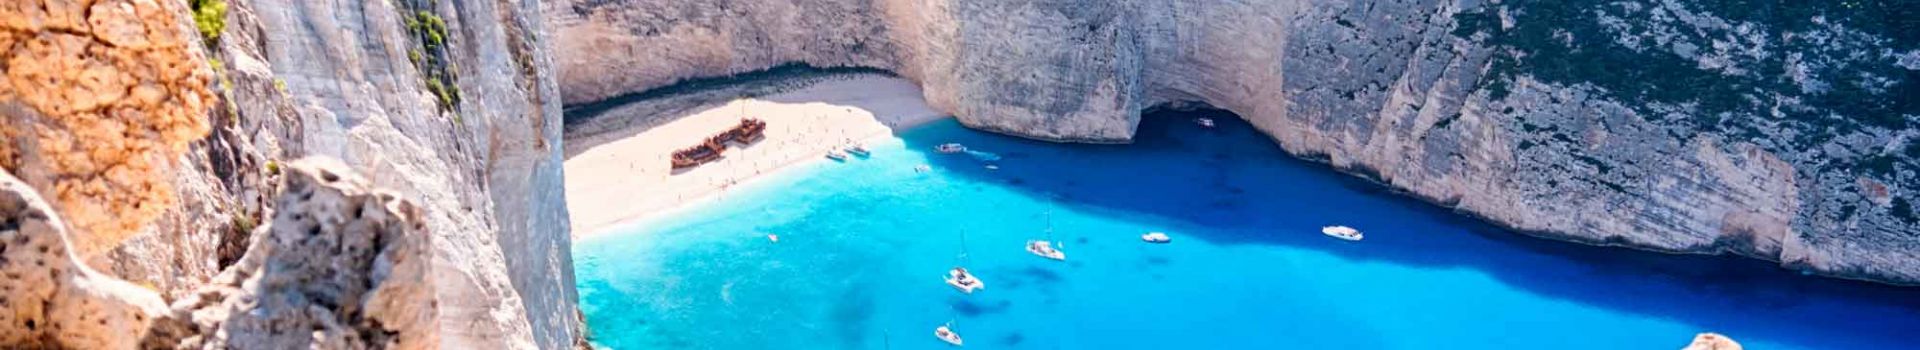 Last minute holidays to Zante with Cassidy Travel